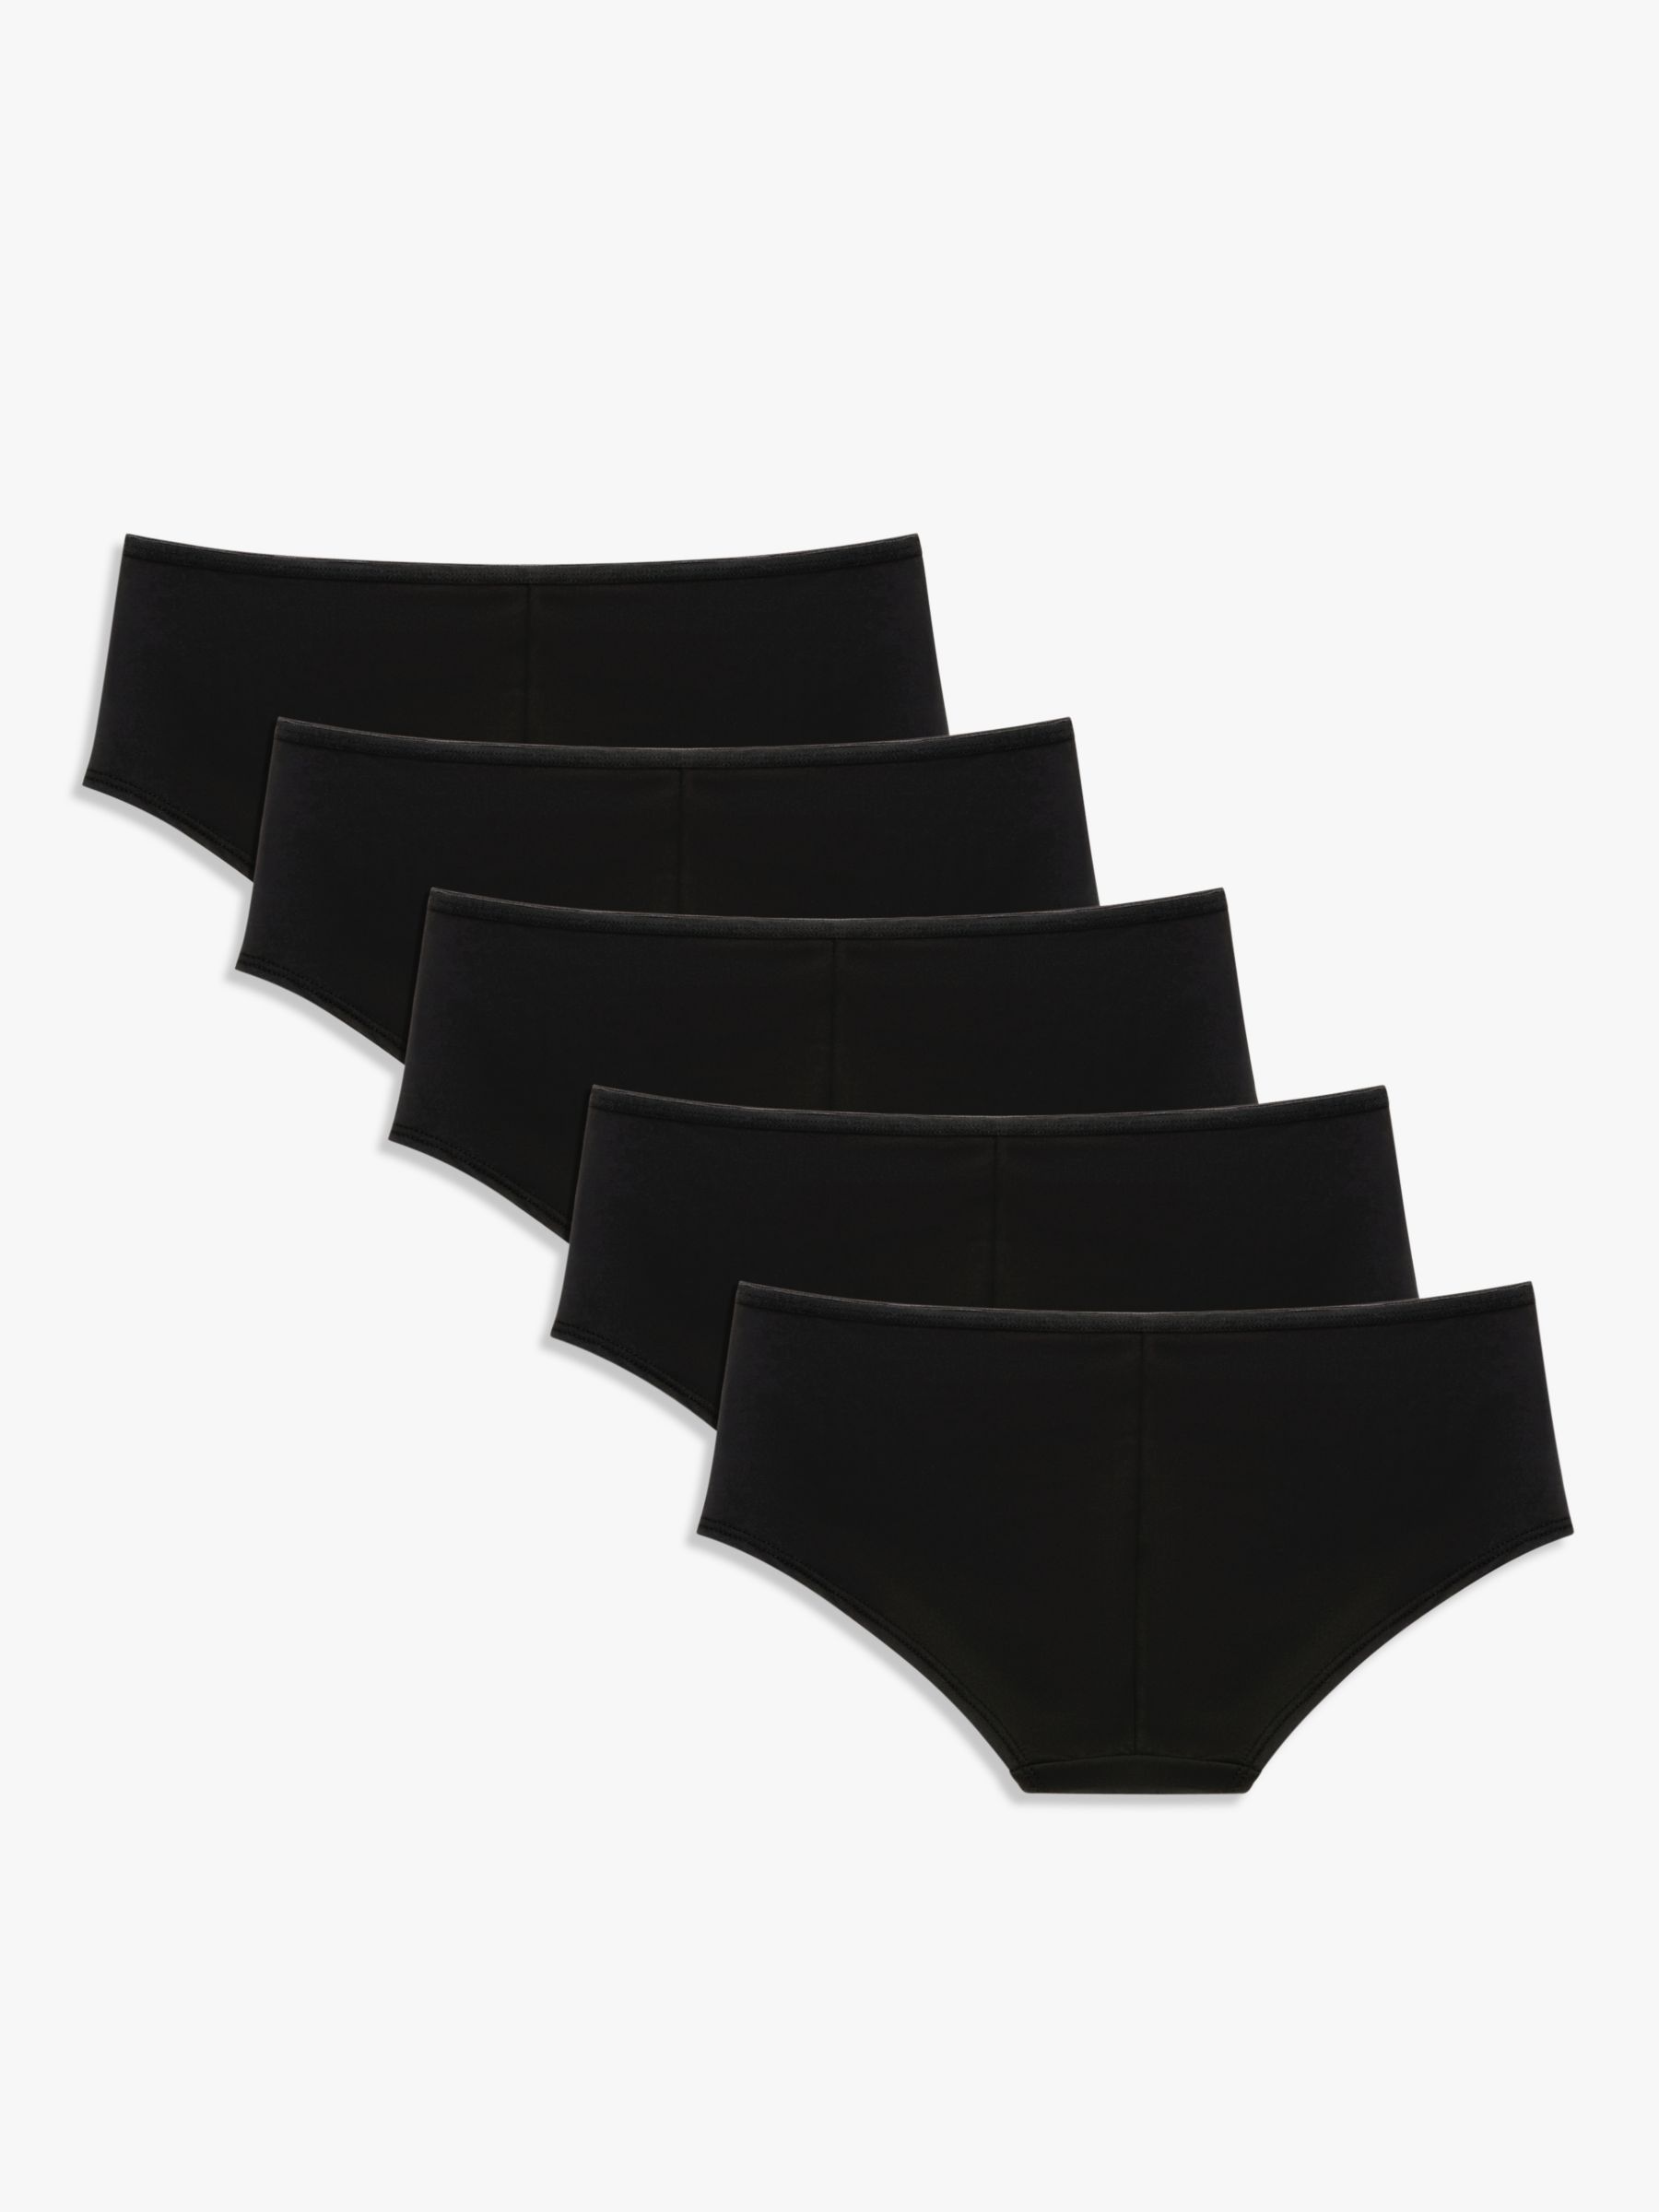 John Lewis ANYDAY Microfibre Short Knickers, Pack of 5, Black, 8